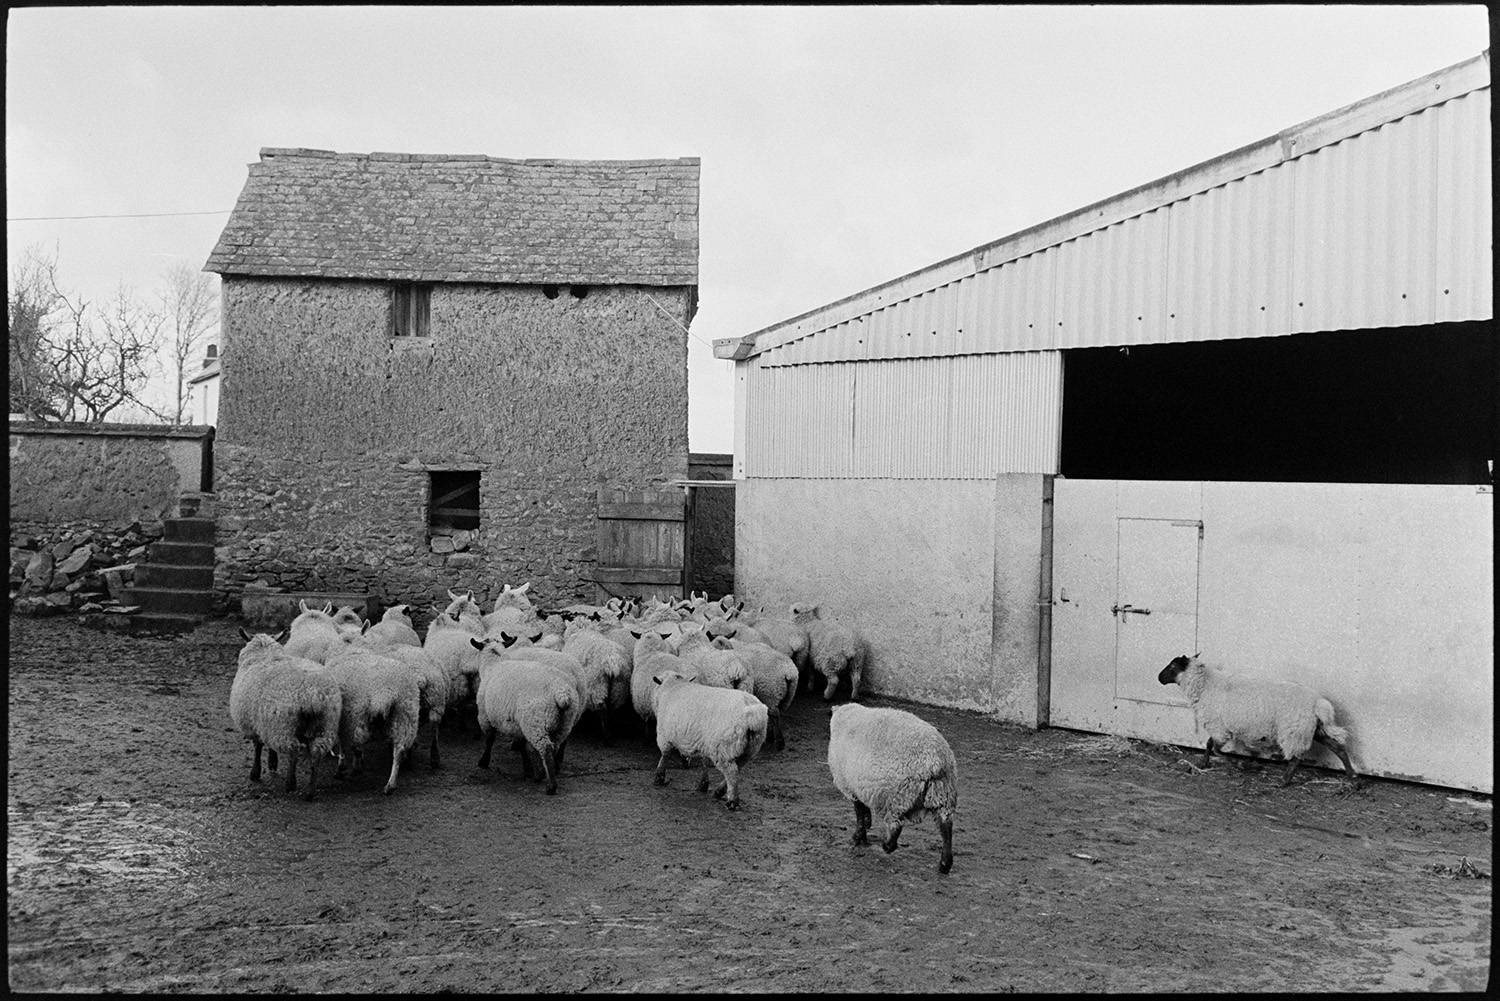 Sheep in farmyard, barn cob and tiled roof. 
[A flock of sheep walking through the farmyard at Parsonage, Iddesleigh. They are passing a corrugated iron barn and a stone, cob and tiled barn with steps.]